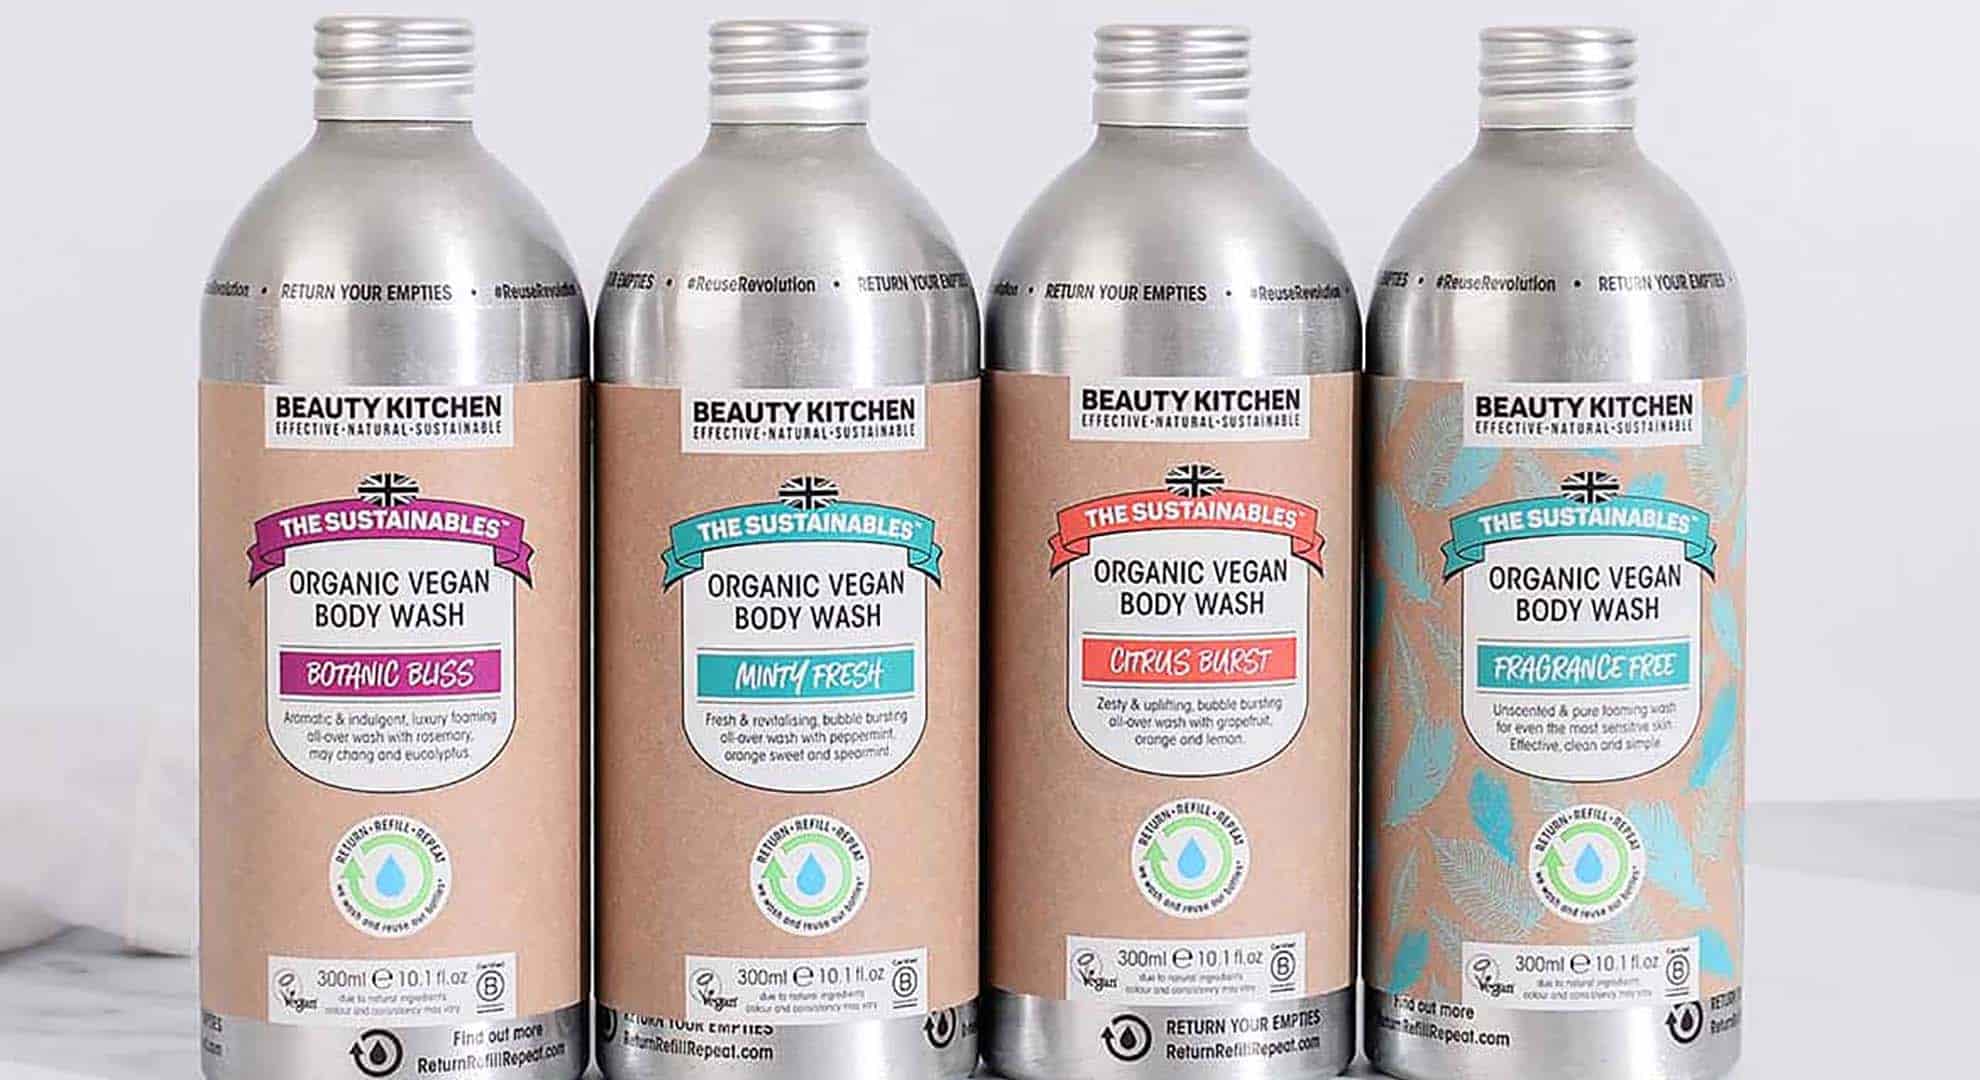 Photo of reusable bottles from the Beauty Kitchen